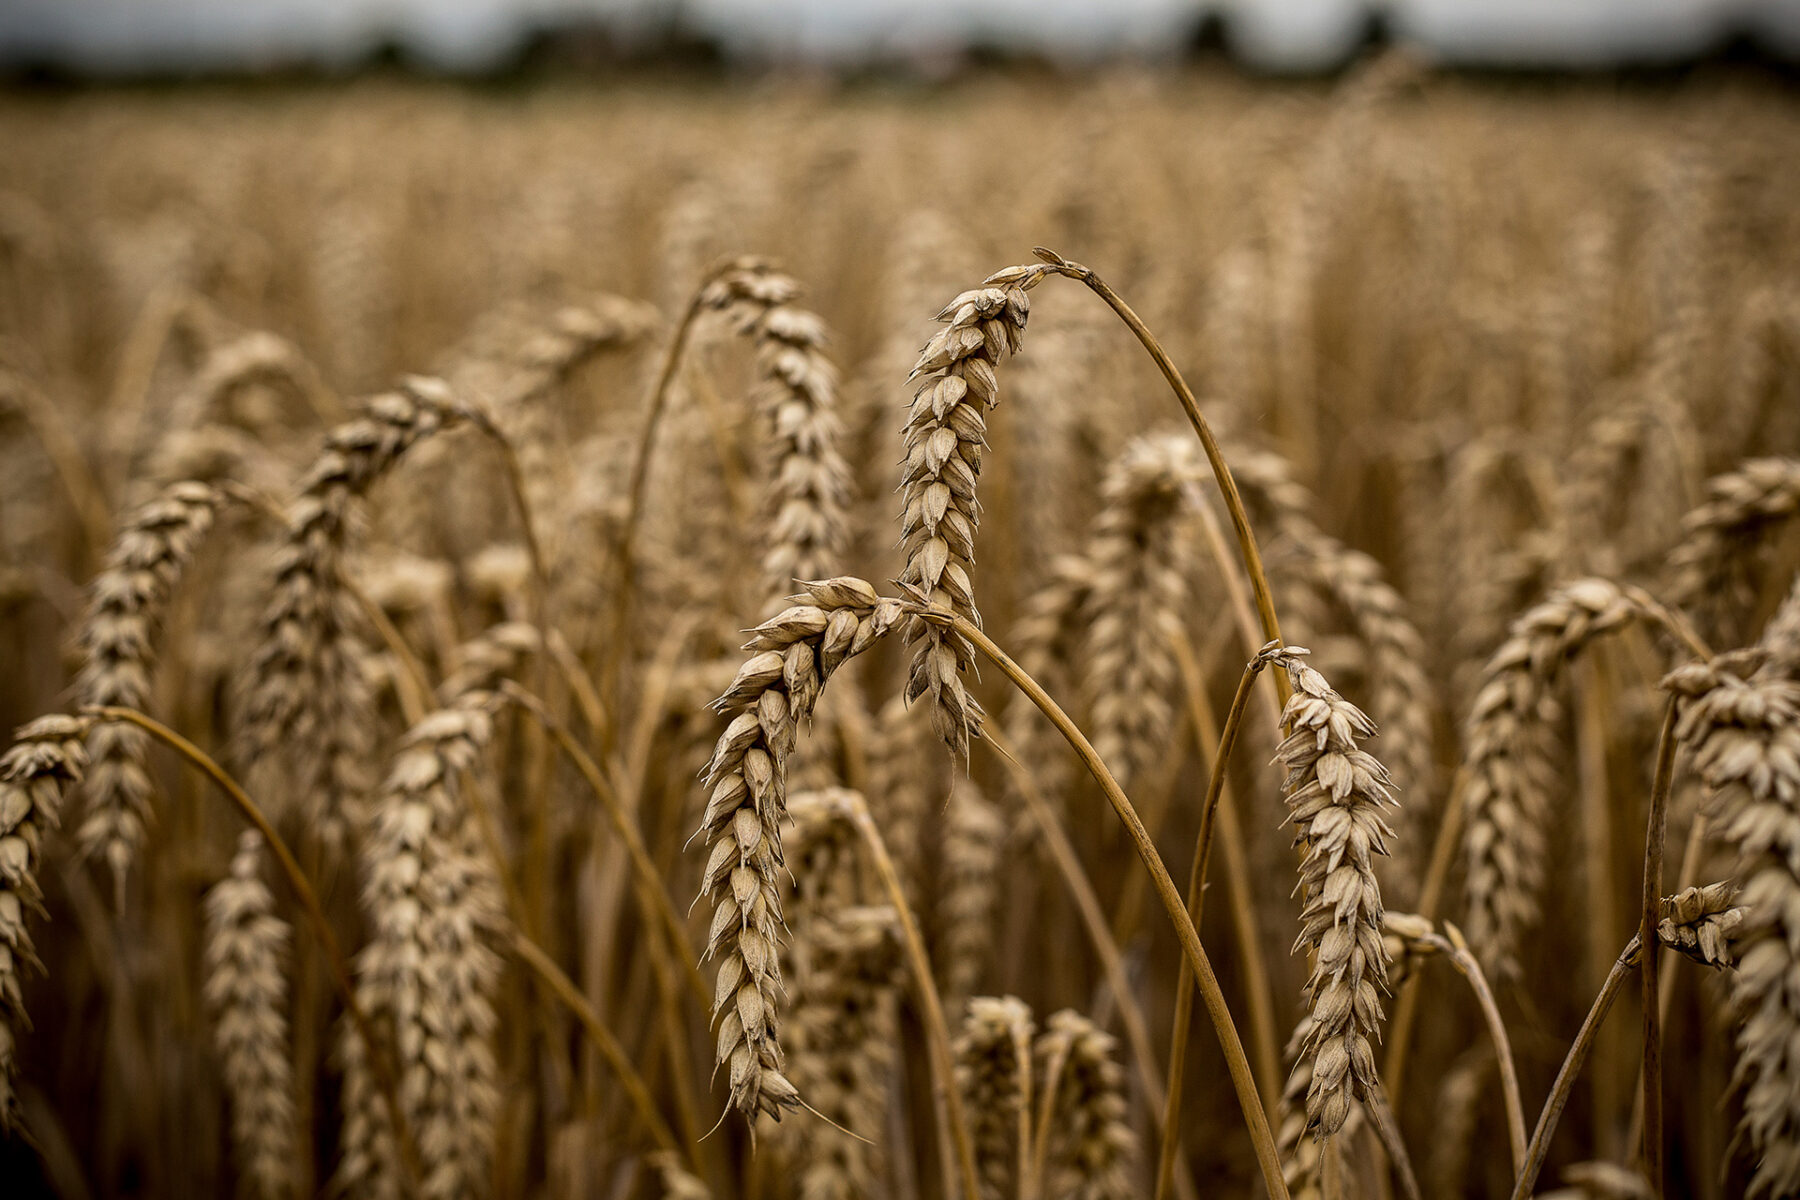 Image of a wheat field focused on wheat right in front of the camera